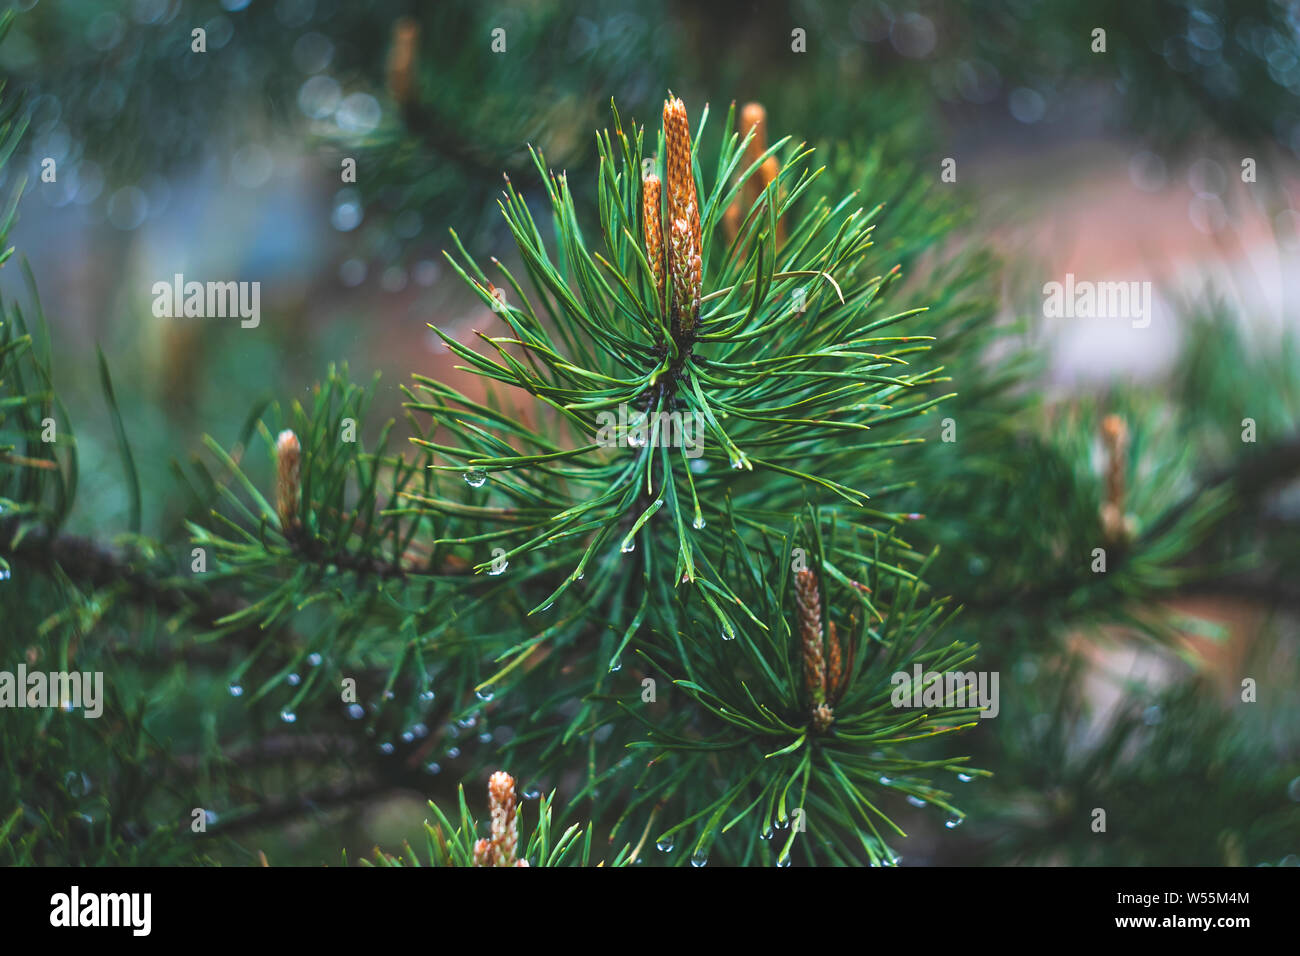 Fir tree branch with cones. Raindrops on spruce needles. Green pine branch close-up on green natural background. Pine tree. Abstract green pattern of Stock Photo